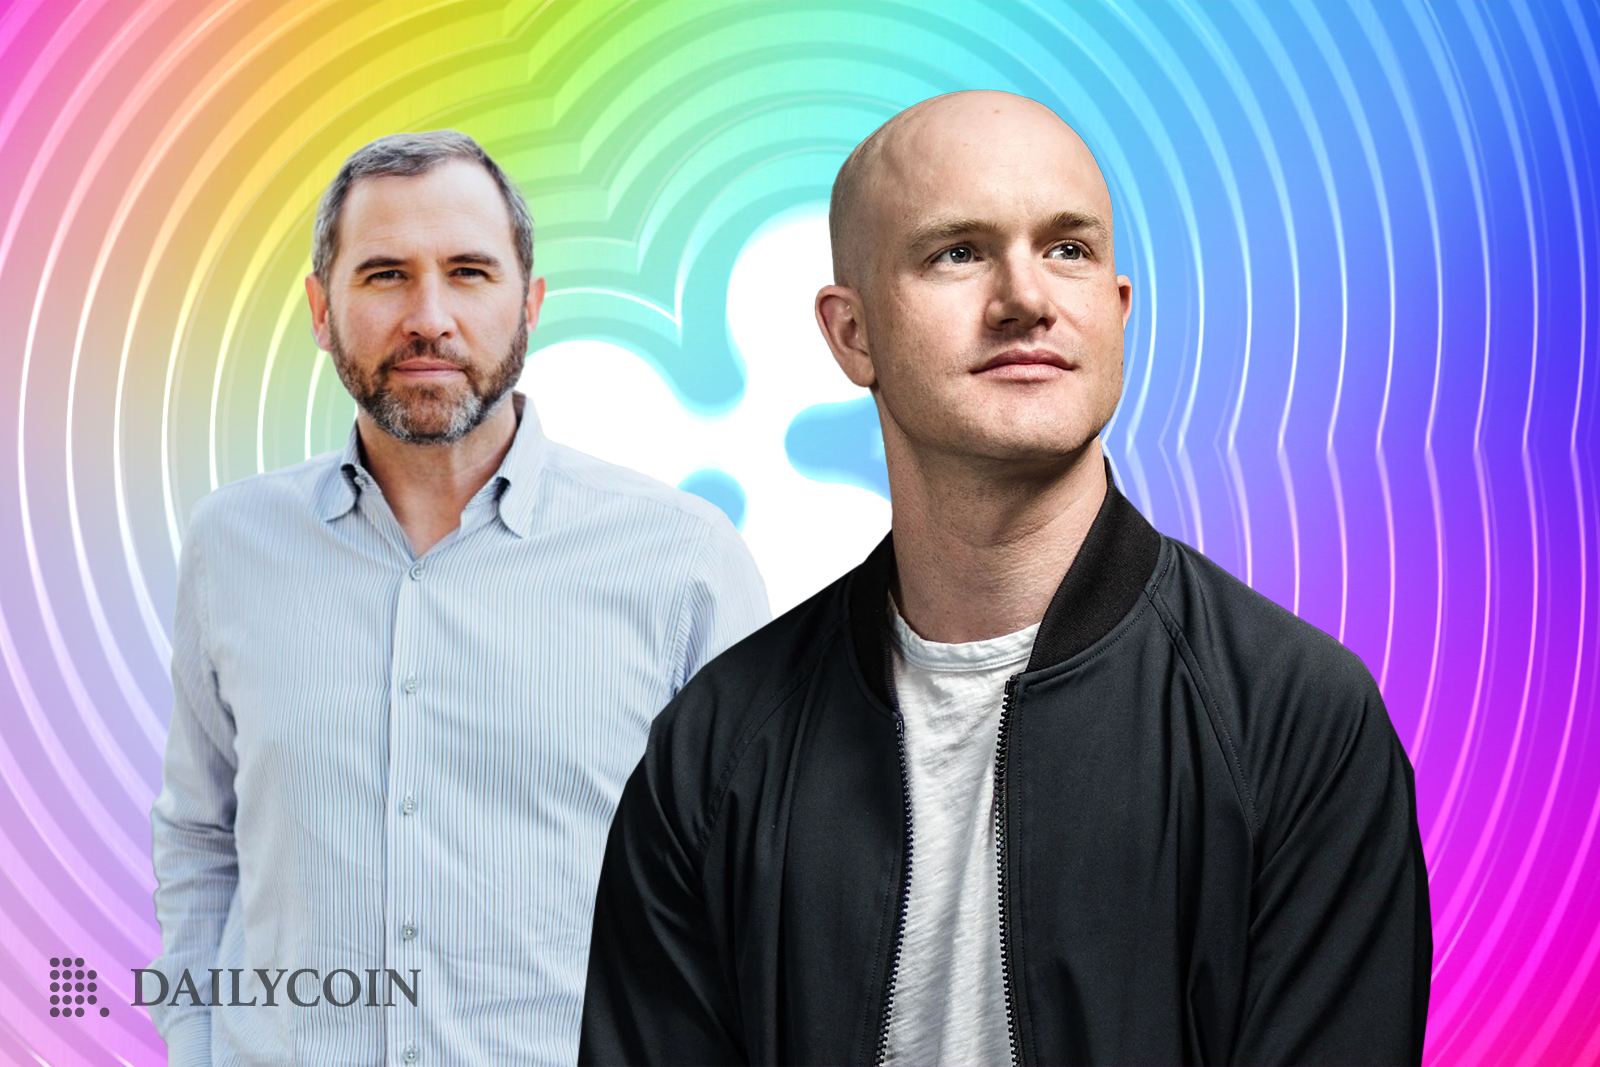 Coinbase CEO Brian Armstrong and Ripple CEO Brad Garlinghouse.